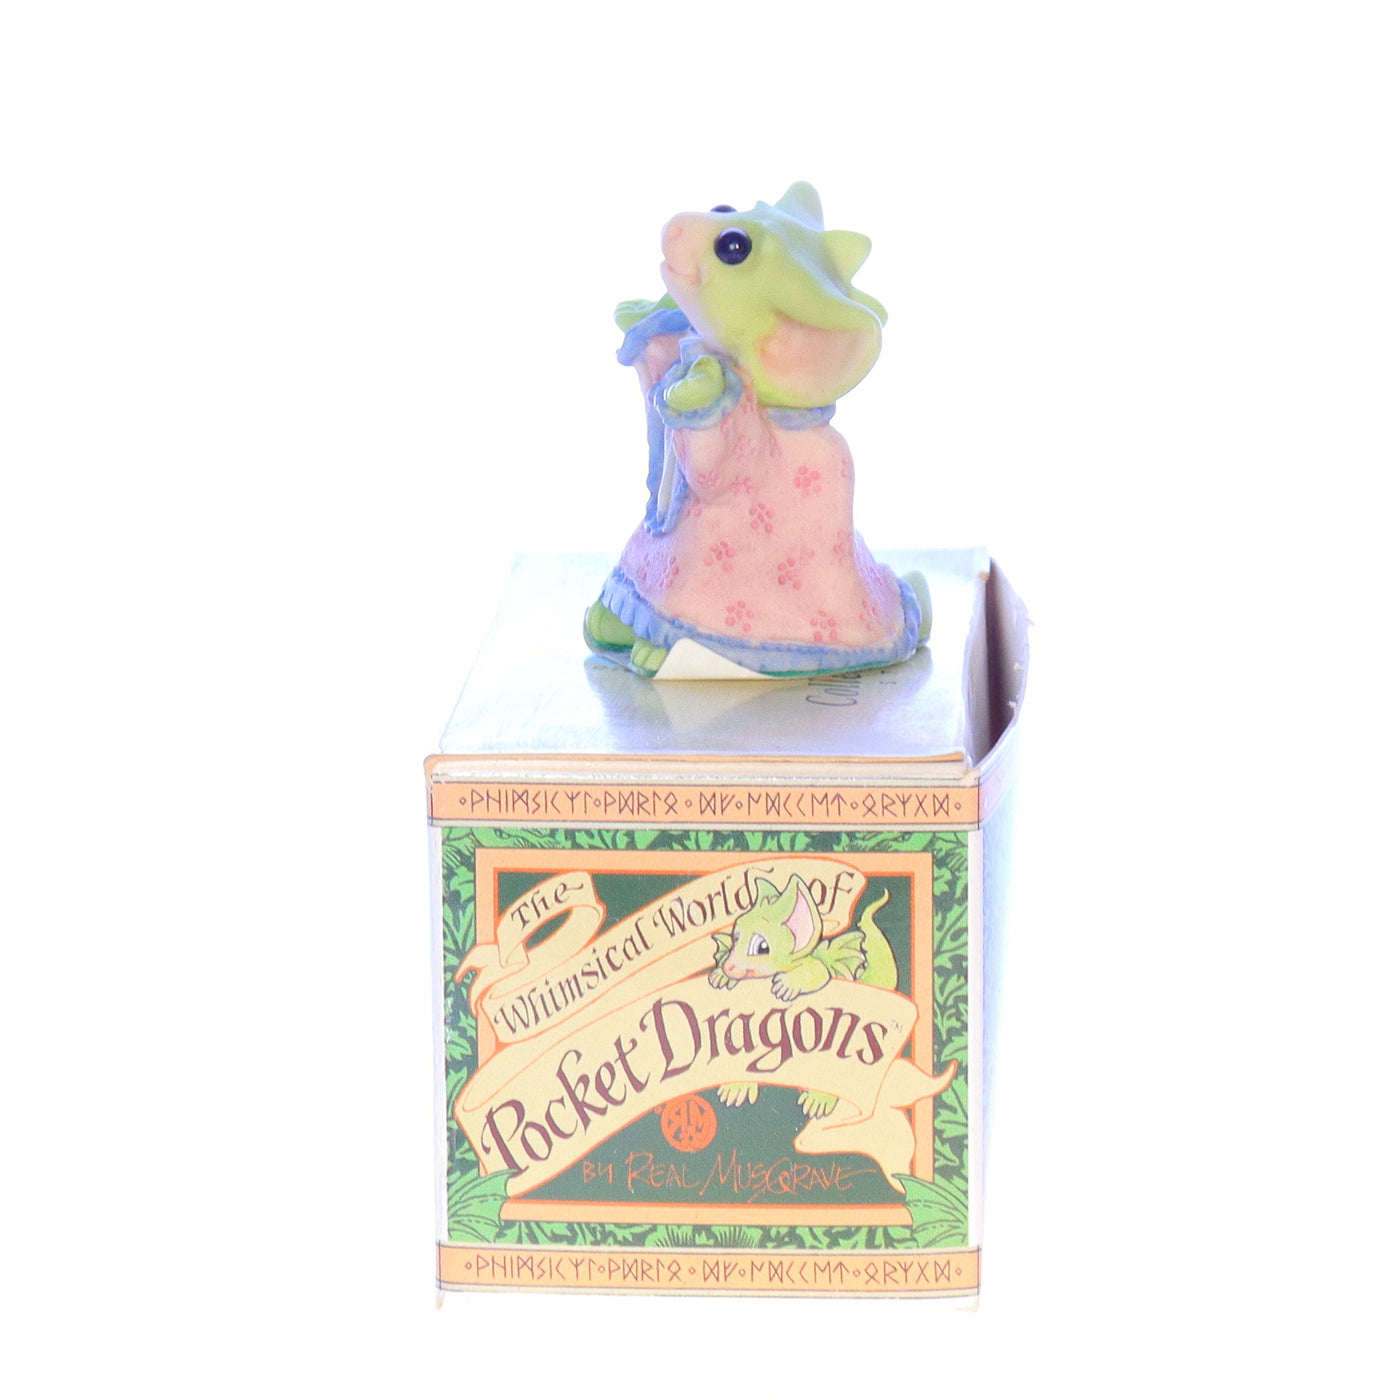 Whimsical_World_of_Pocket_Dragons_053839028998_Flannel_Nightie_Fantasy_Figurine_1998_Box Left Side View